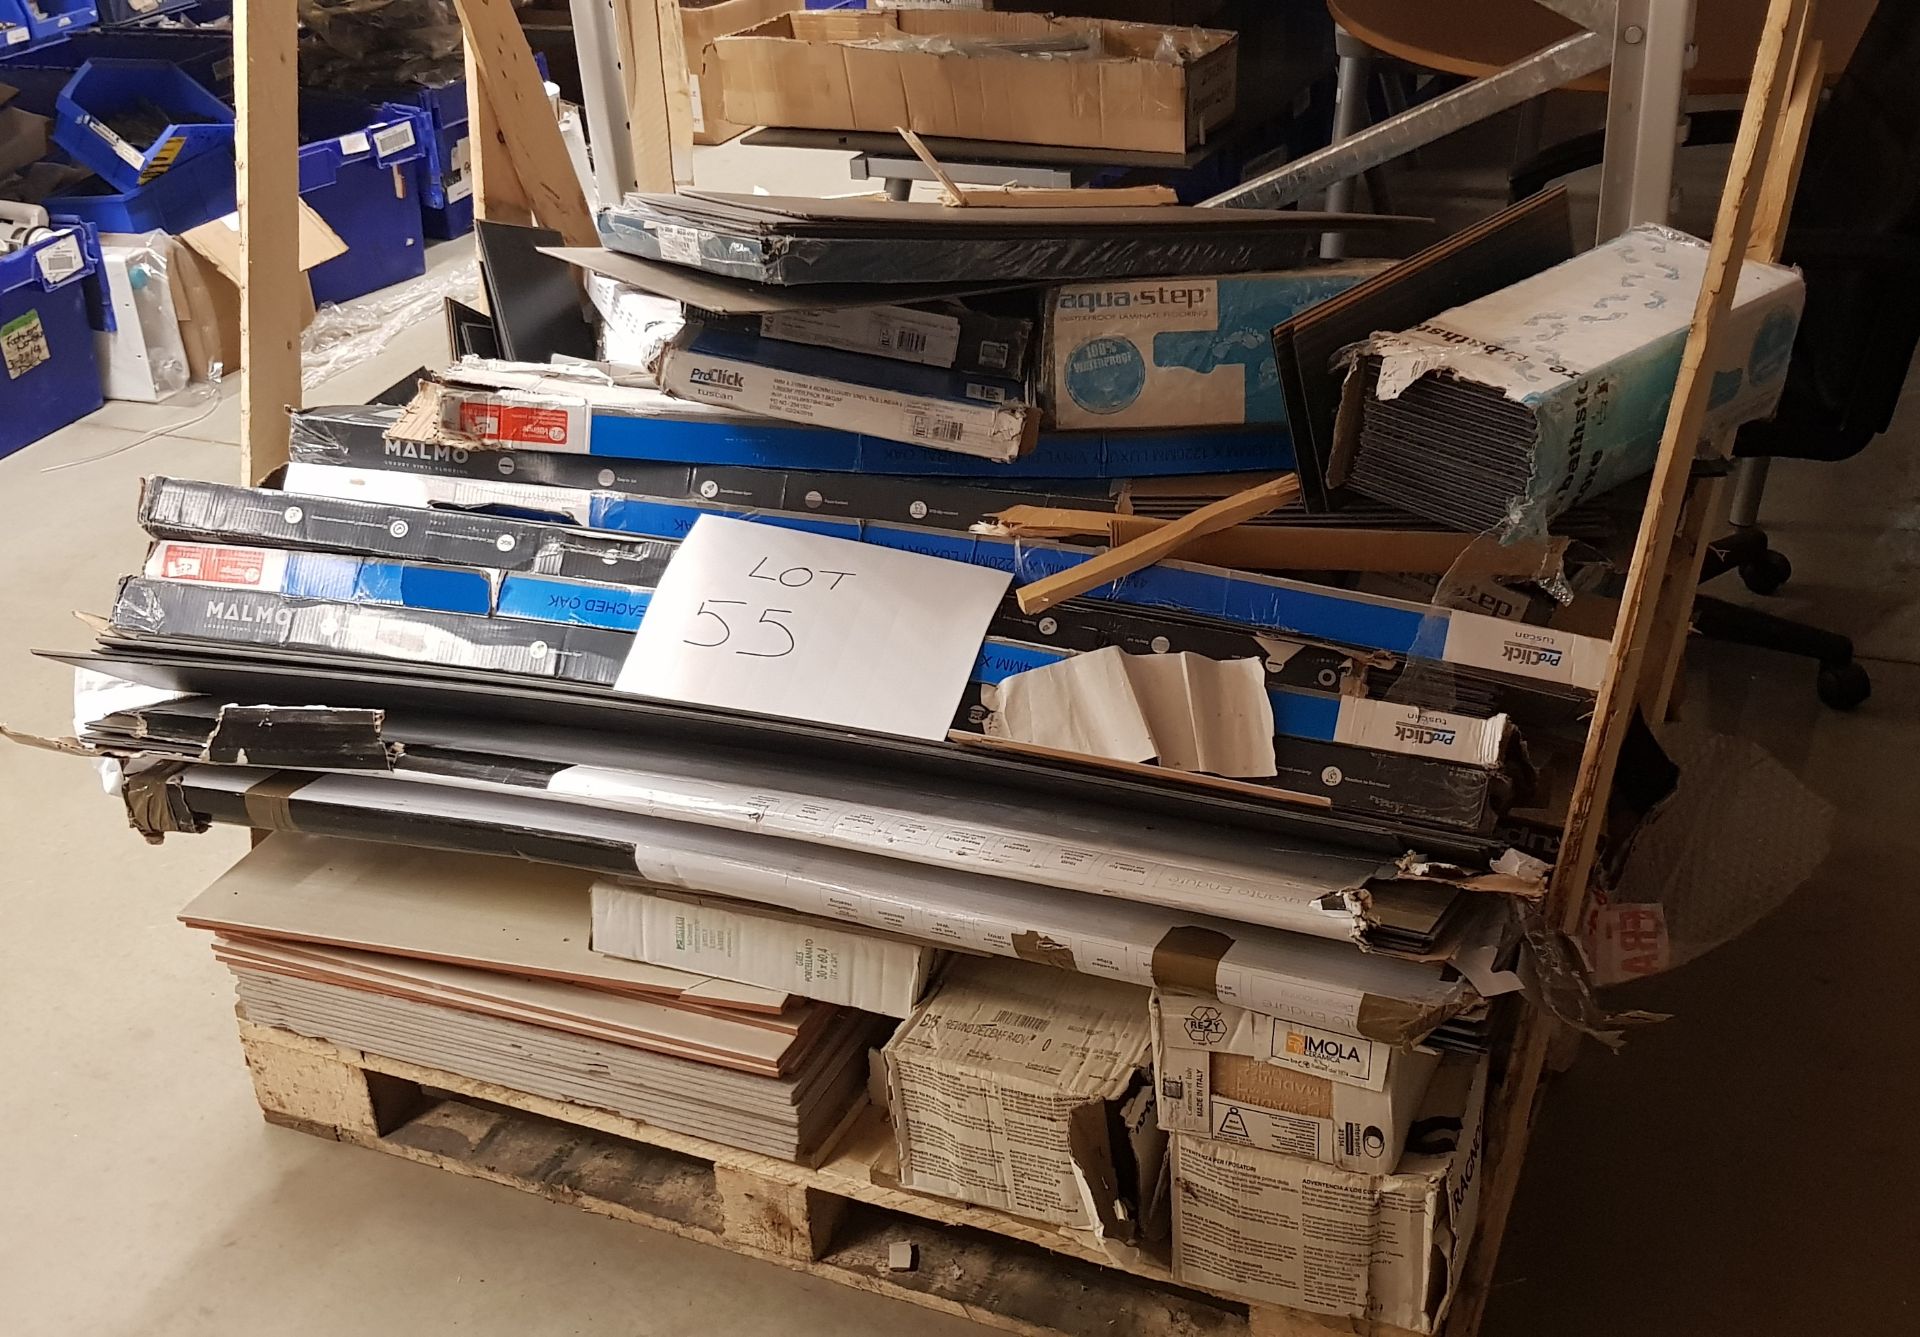 A VERY LARGE QUANTITY OF WATERPROOF VINYL FLOORING AND MIXED CERAMIC TILES